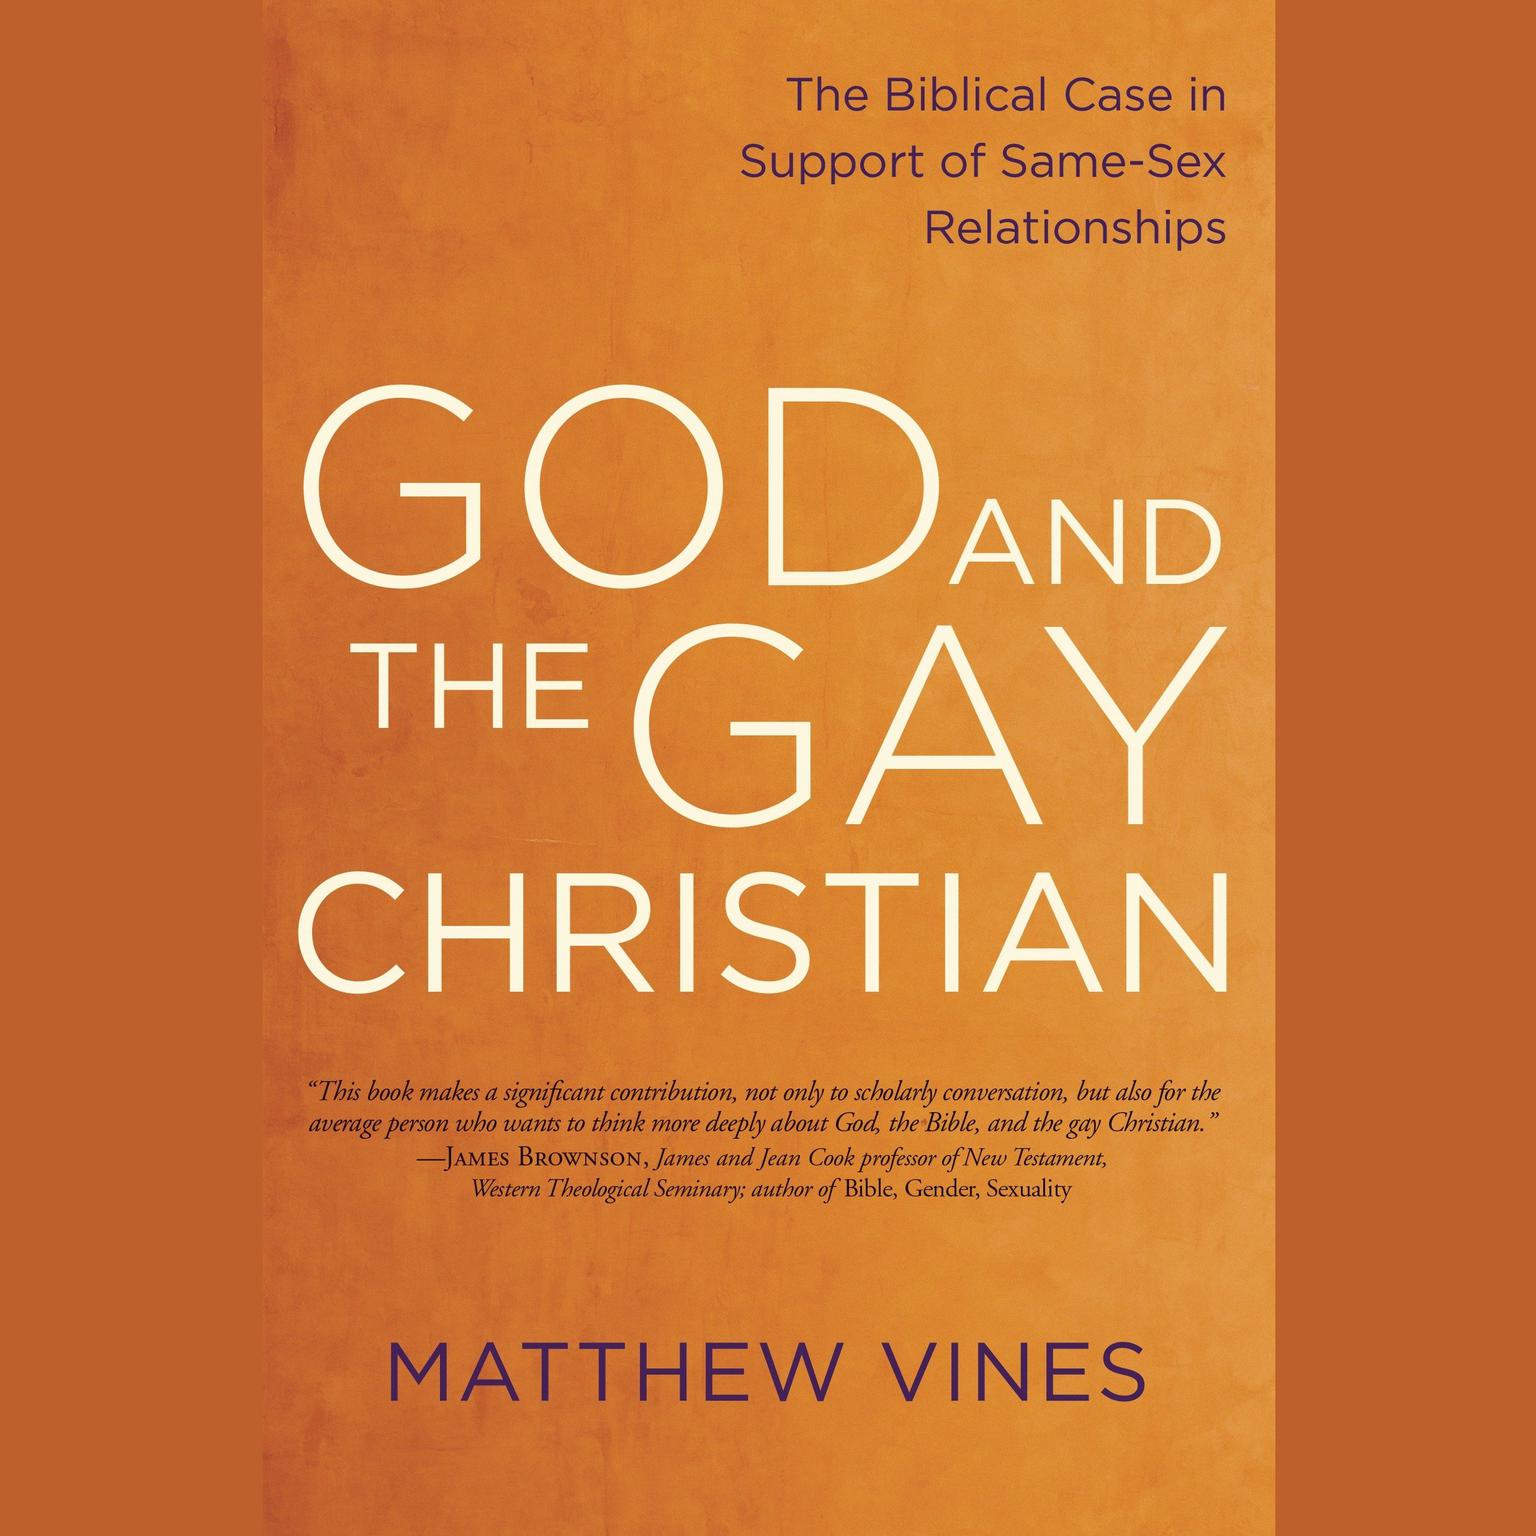 God and the Gay Christian: The Biblical Case in Support of Same-Sex Relationships Audiobook, by Matthew Vines